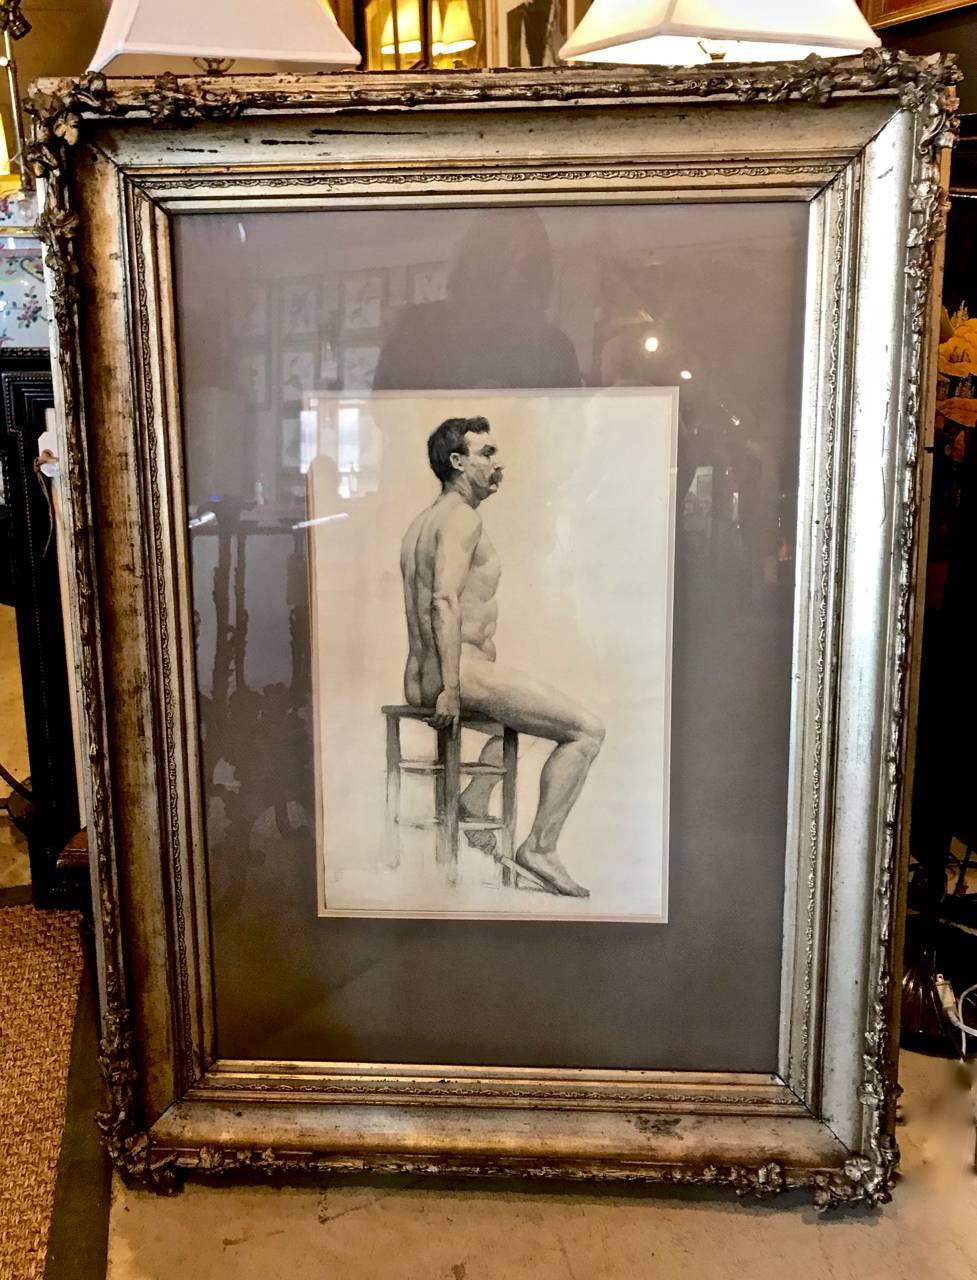 Beautifully rendered drawing of male nude. This drawing is most probably French in origin, dating to the late 19th or early 20th century. The drawing is signed with a monogram at lower which we have not researched. The antique gilt frame, although